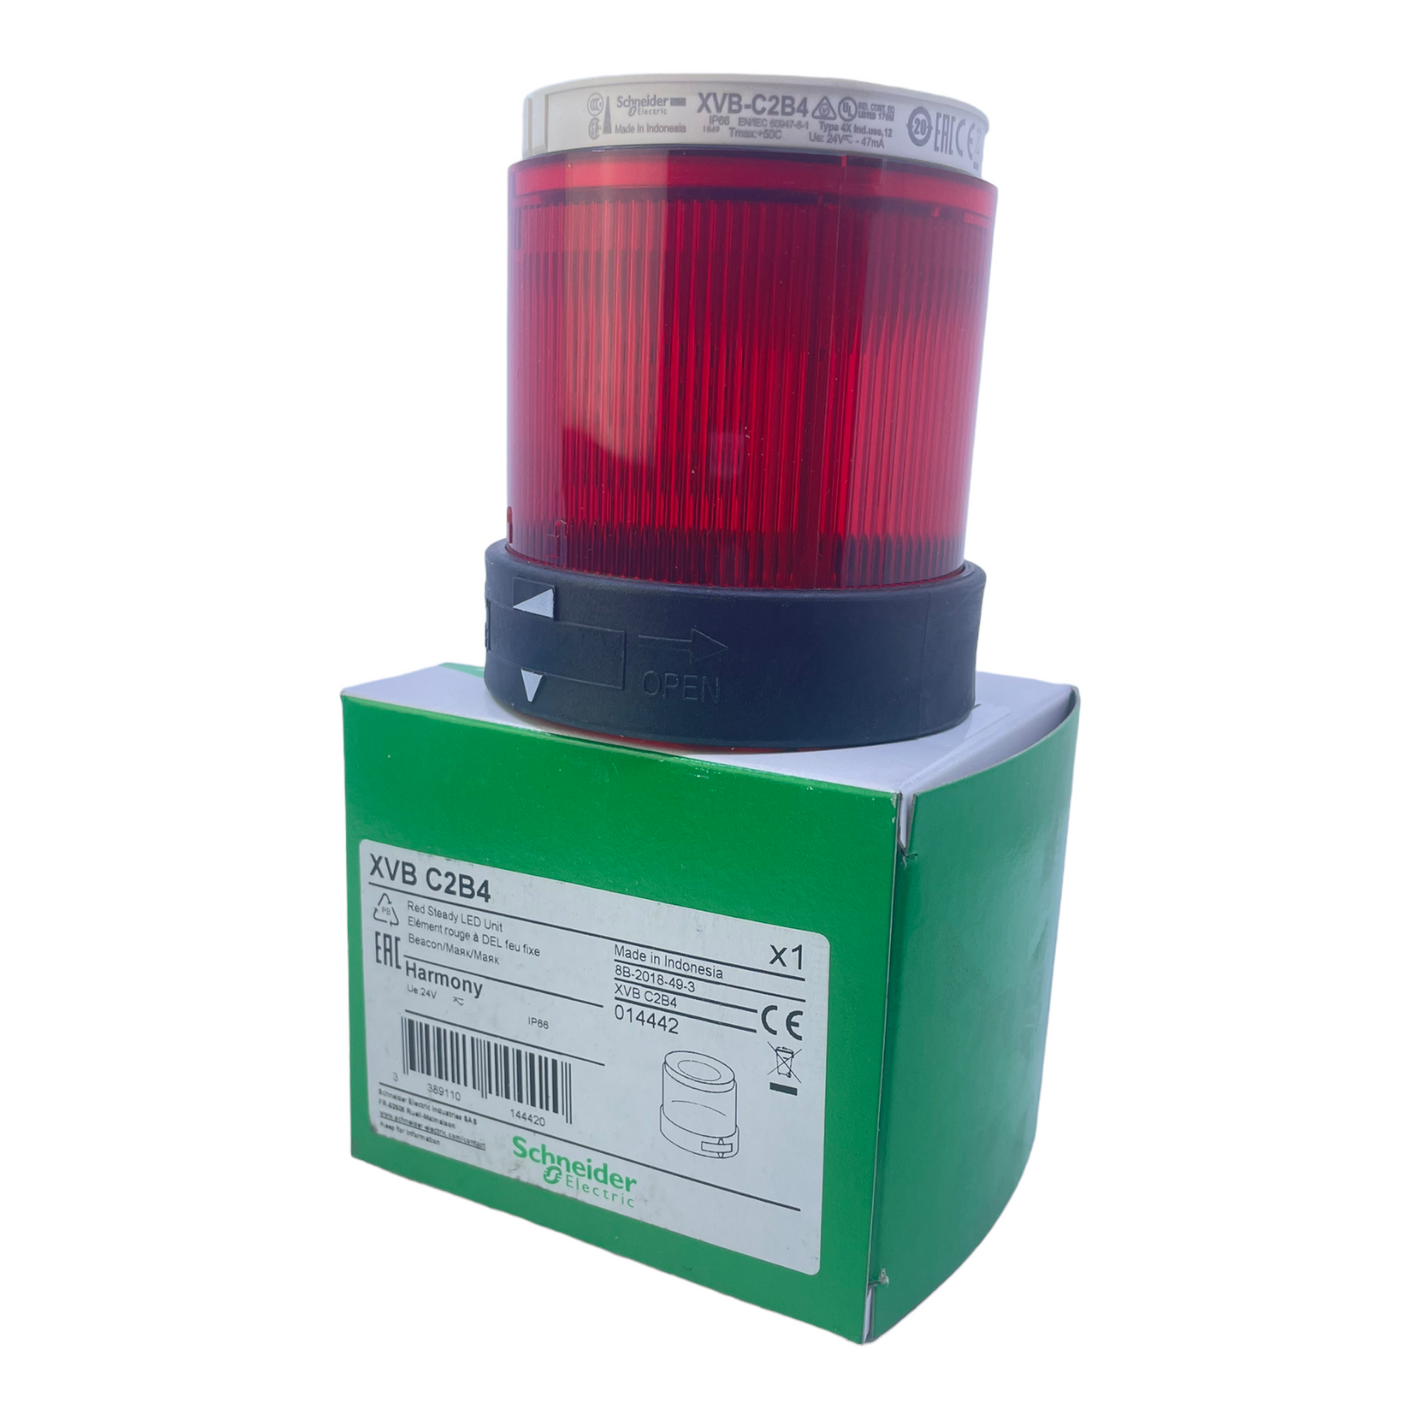 Schneider Electric XVBC2B4 Red light element for industrial use 24V 